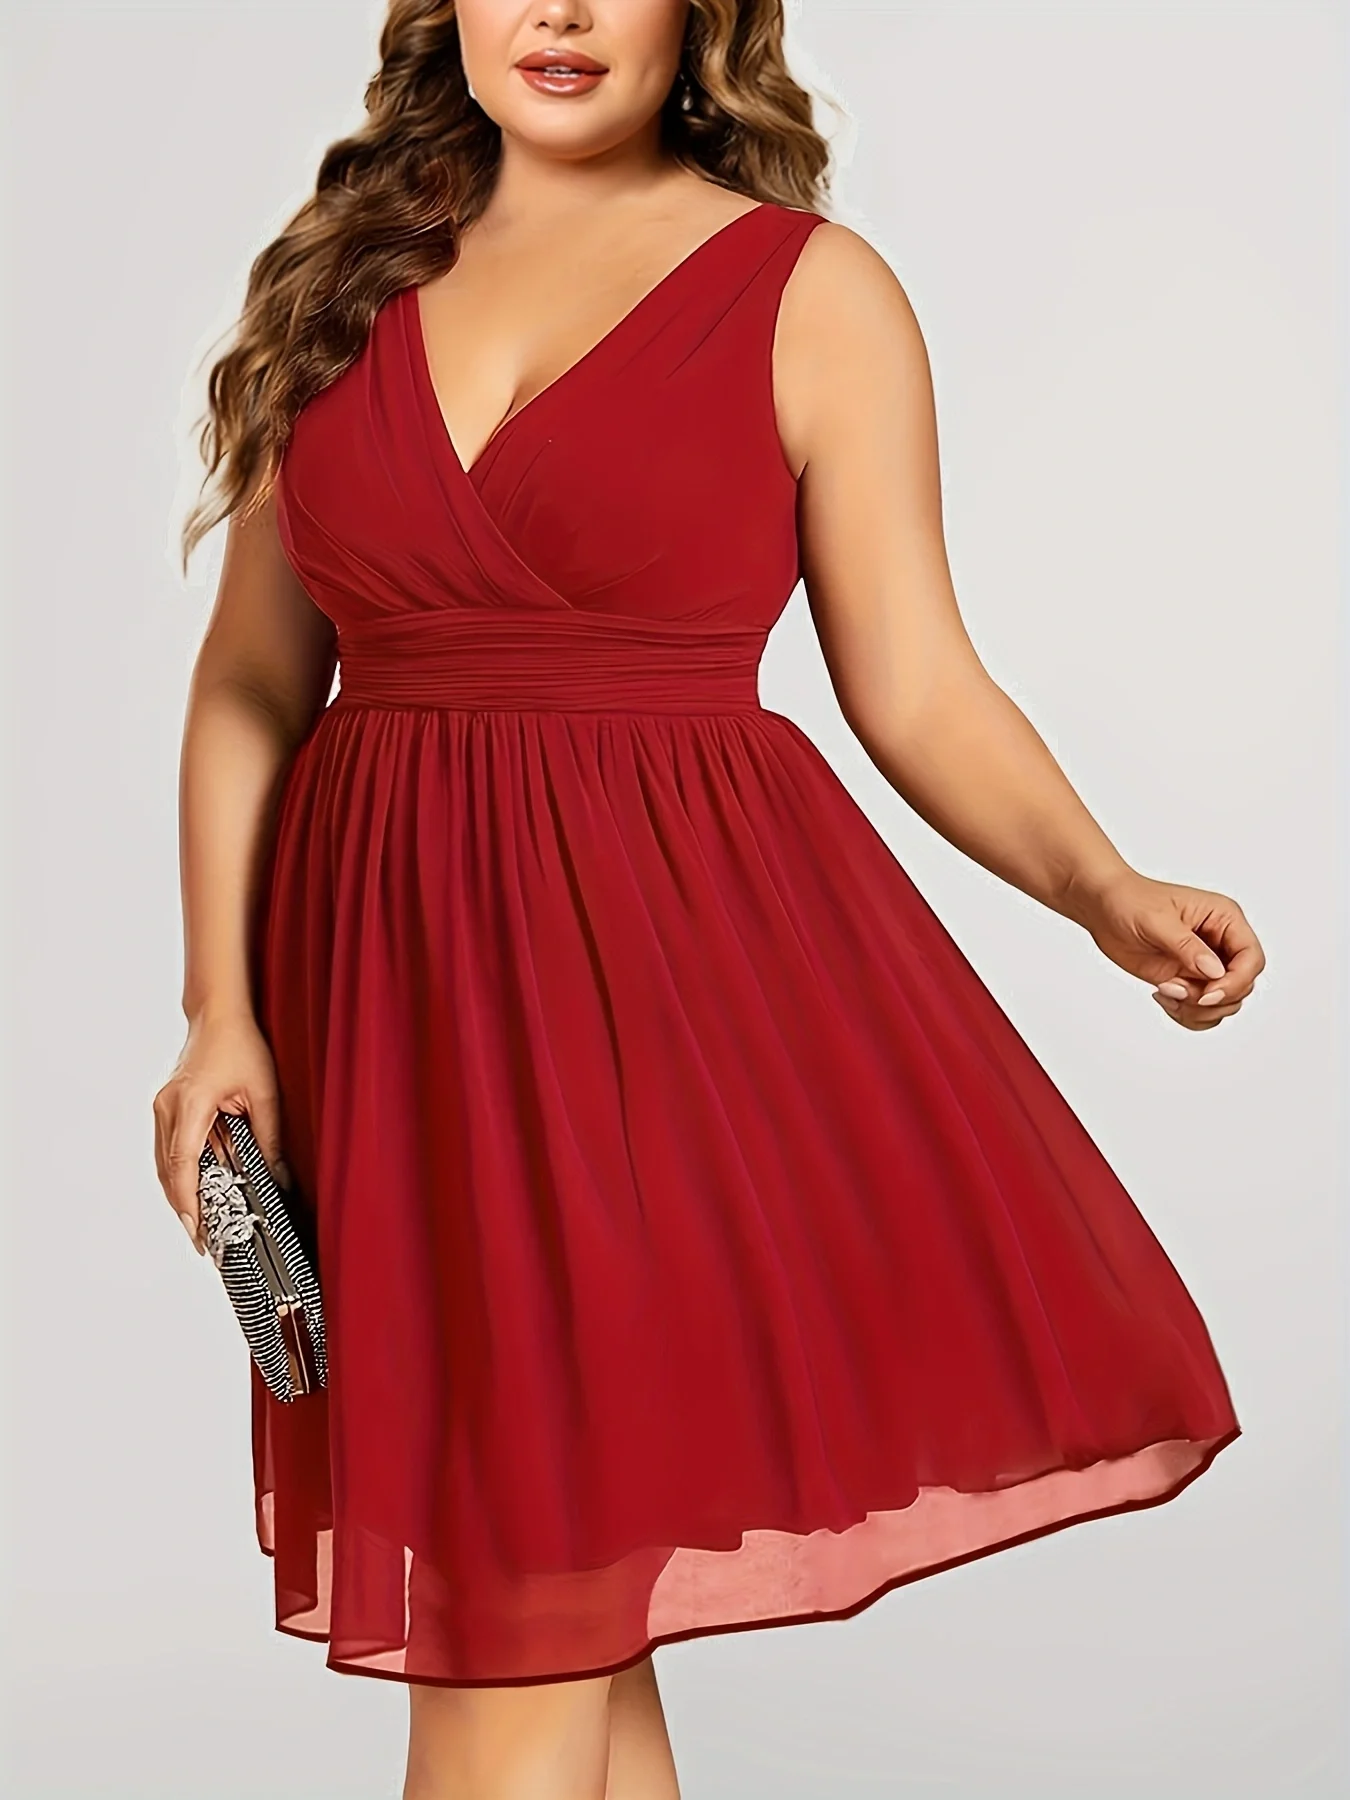 

Plus Size Chiffon Sleeveless V Neck Short Bridesmaid Dress Cocktail Pleated A Line Wedding Party Dresses For Women Summer